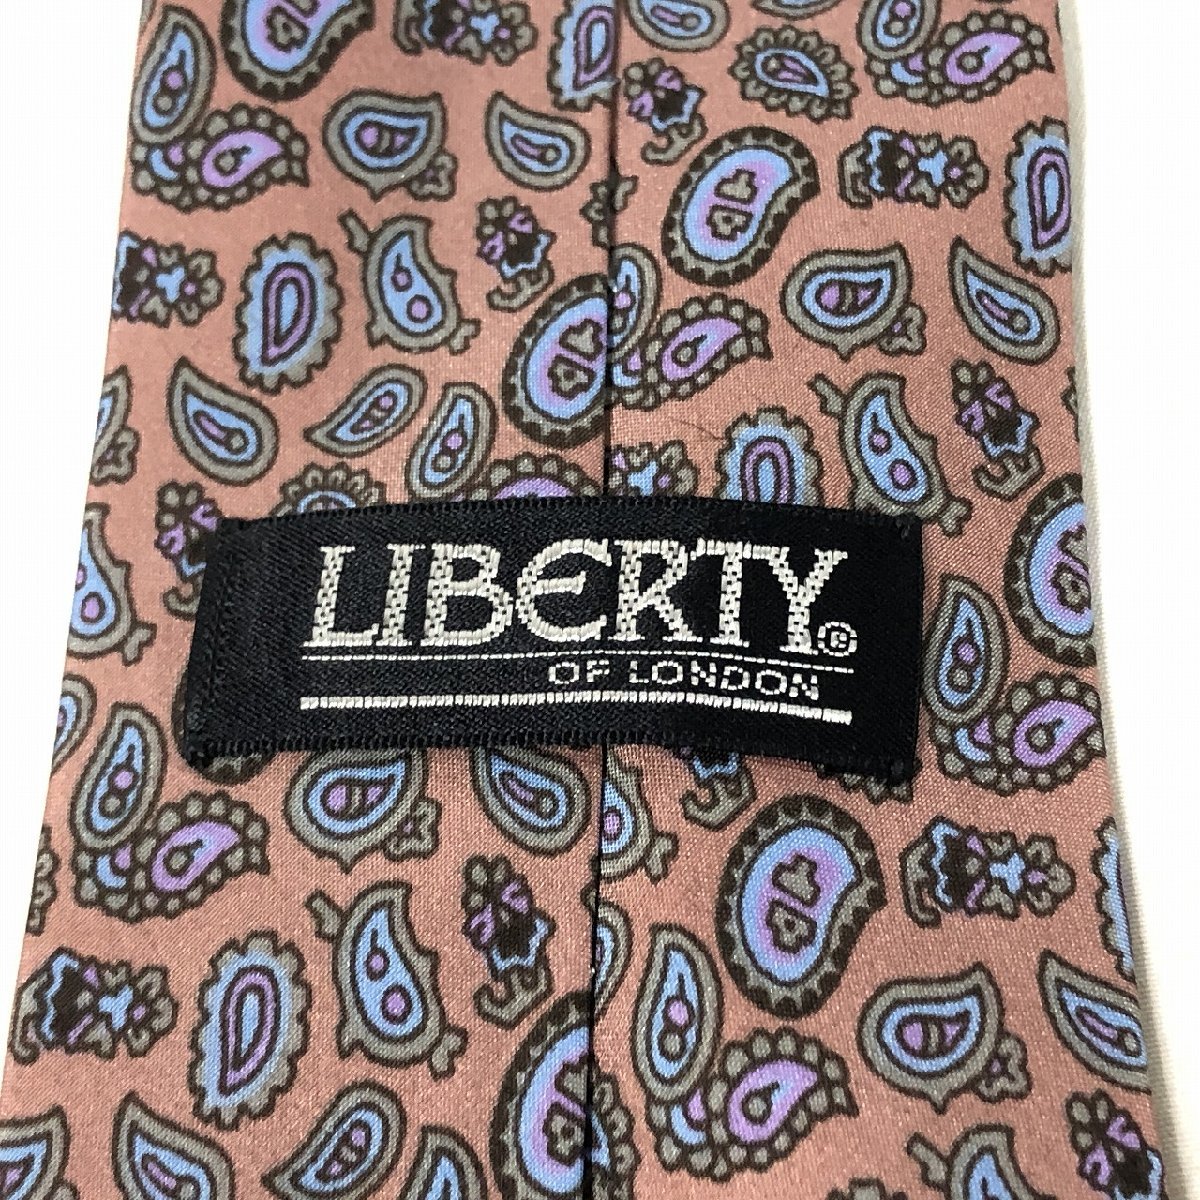 LIBERTY OF LONDON メンズ ペイズリー柄 ネクタイ ダークピンク 青 未使用 送料185円_画像4